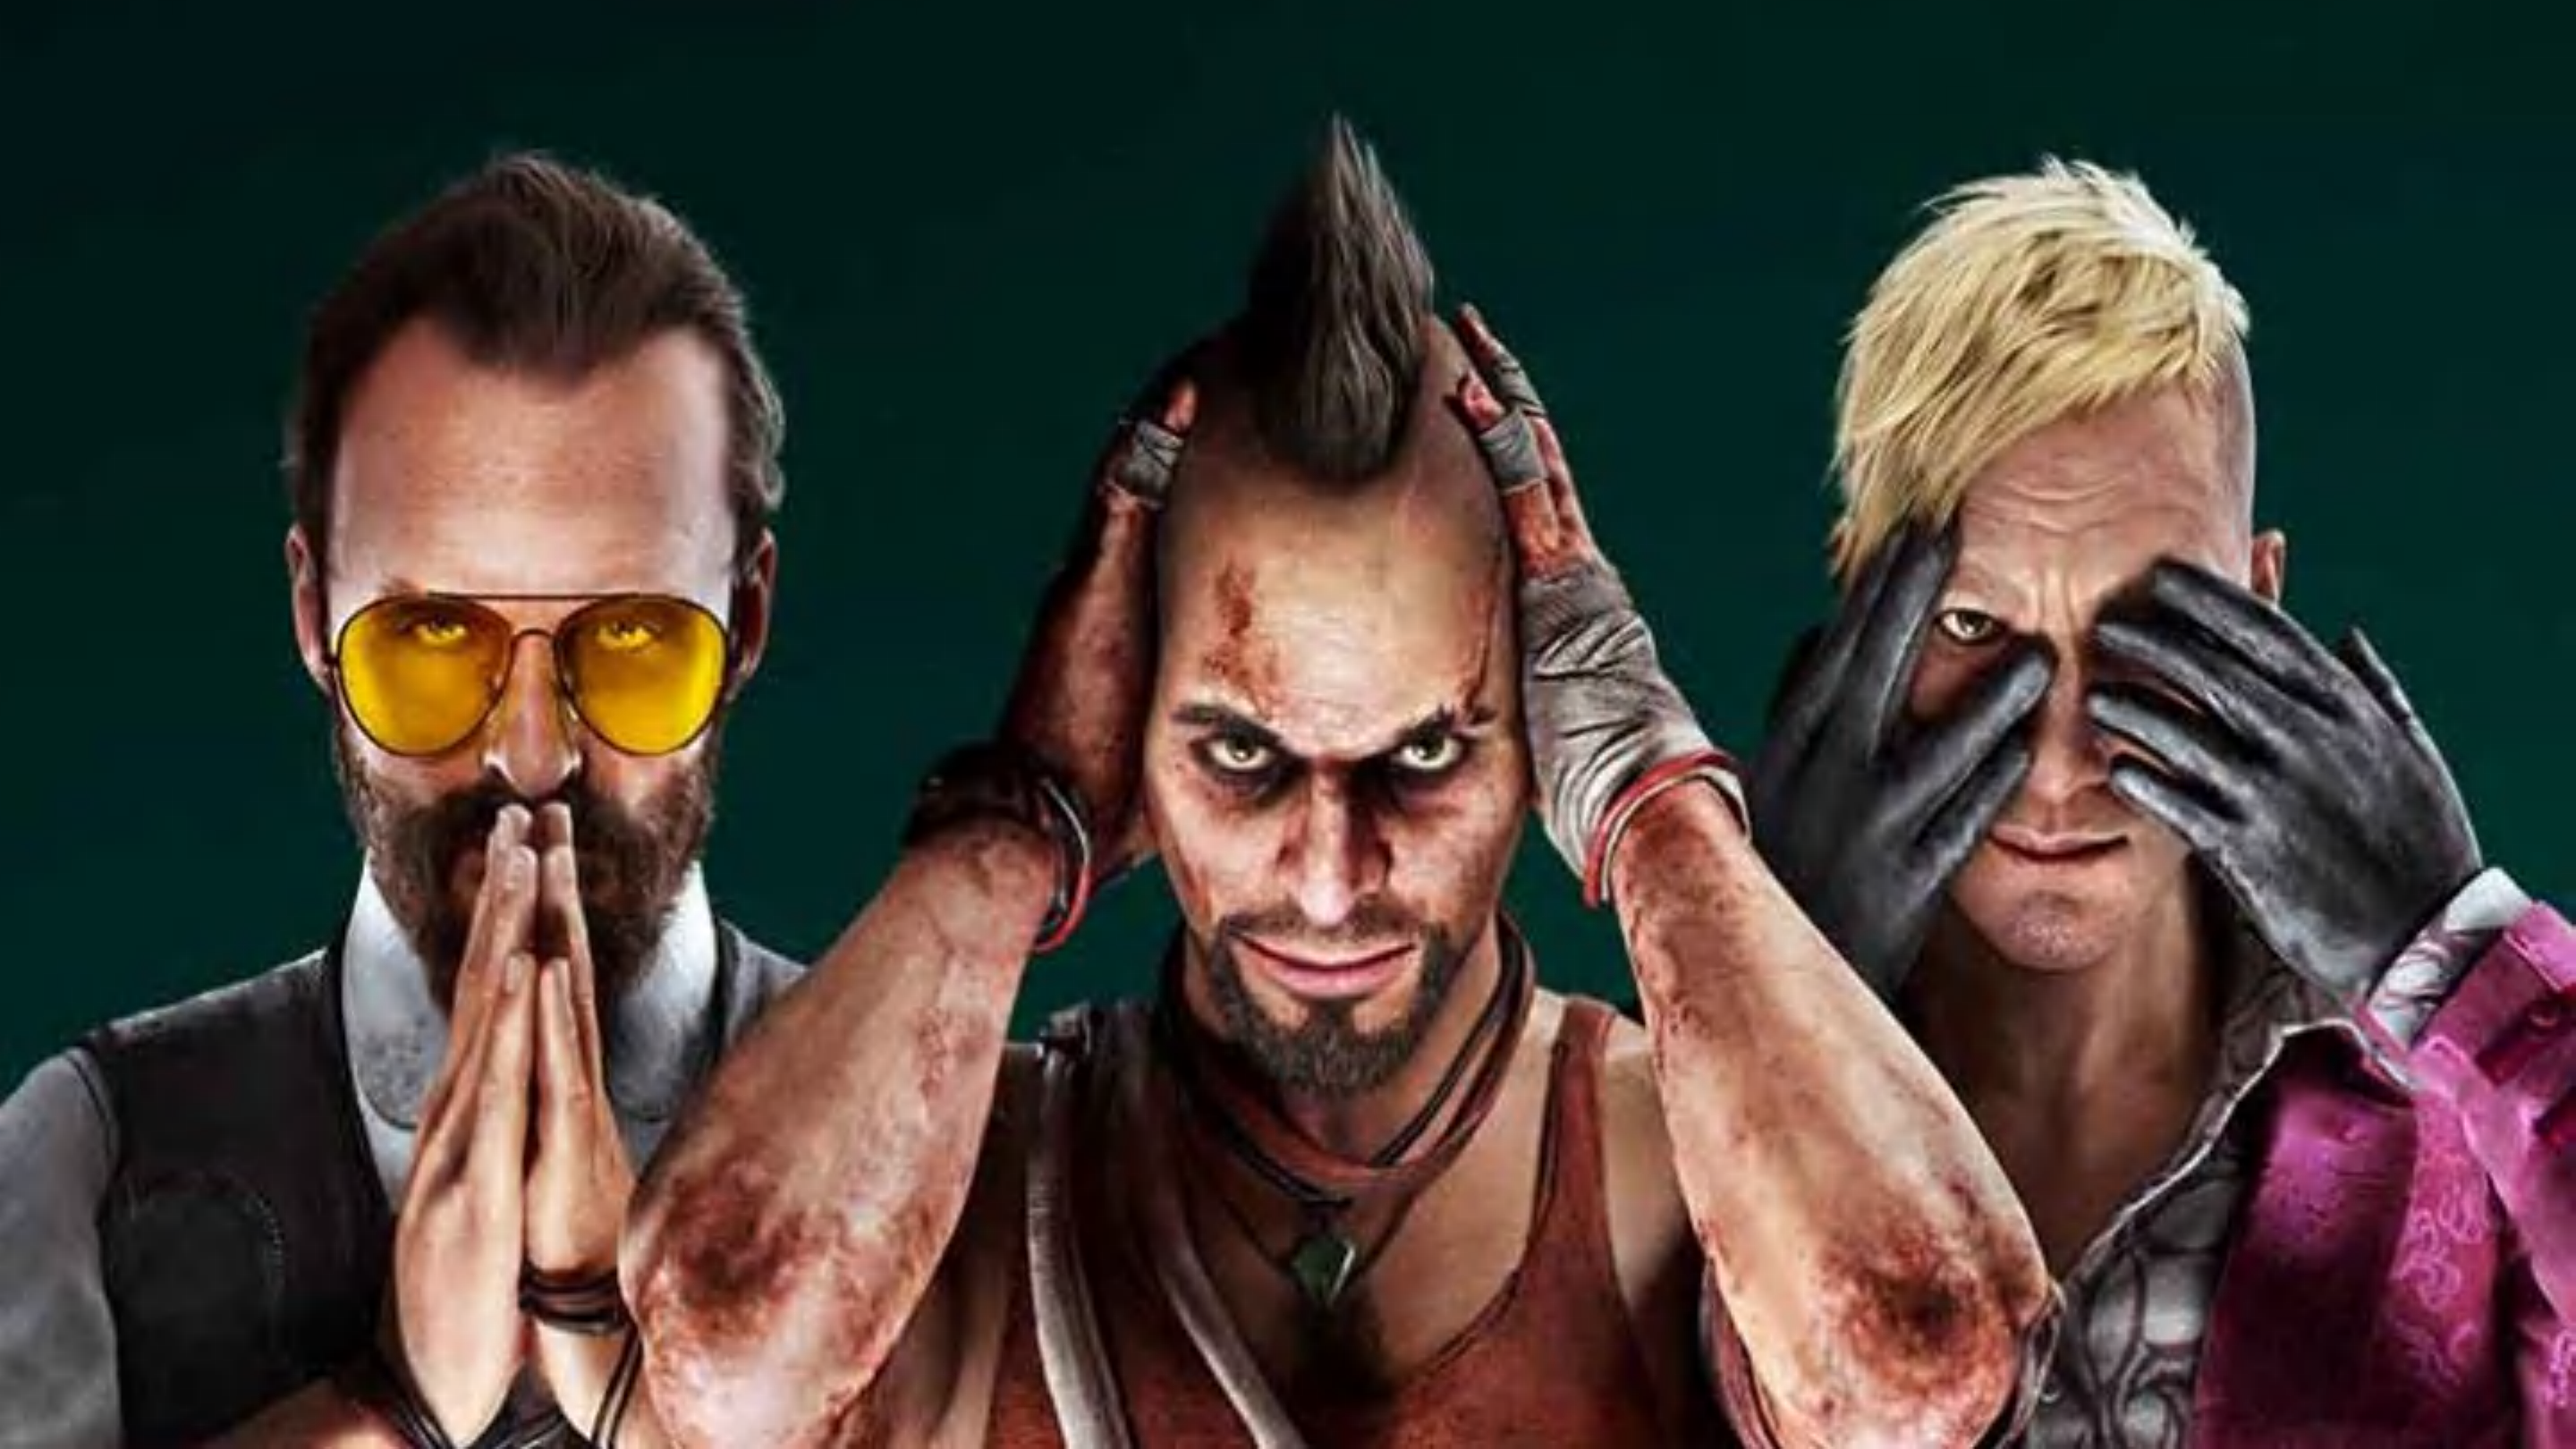 Far Cry 6 Update 1.000.013 Rolled Out This Feb. 14 - MP1st